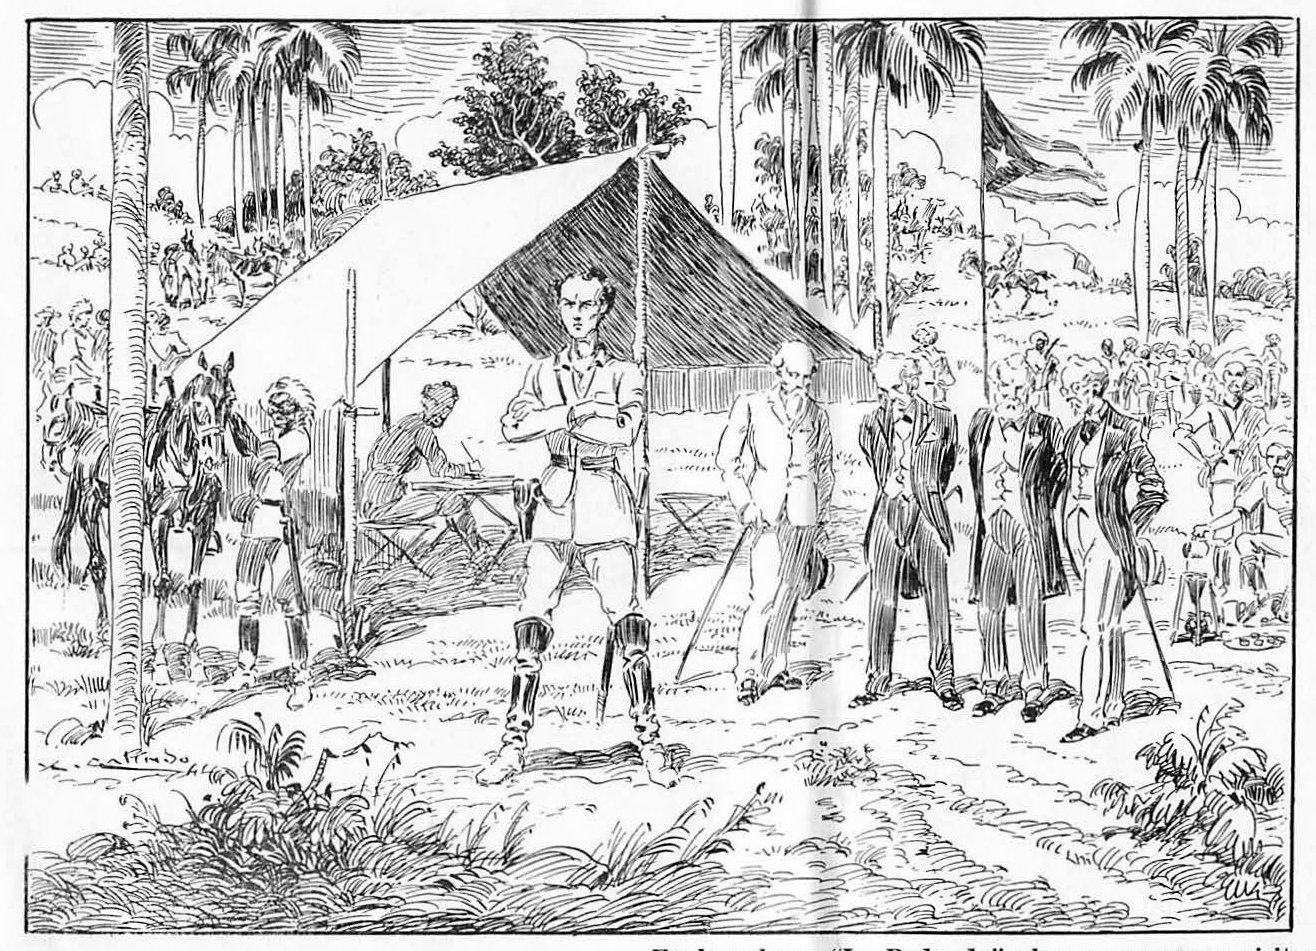 In camp at La Redonda, a delegation asks Major Ignacio Agramonte, with what will you continue this bloody fight? His famous response, With the shame of the Cuban People!